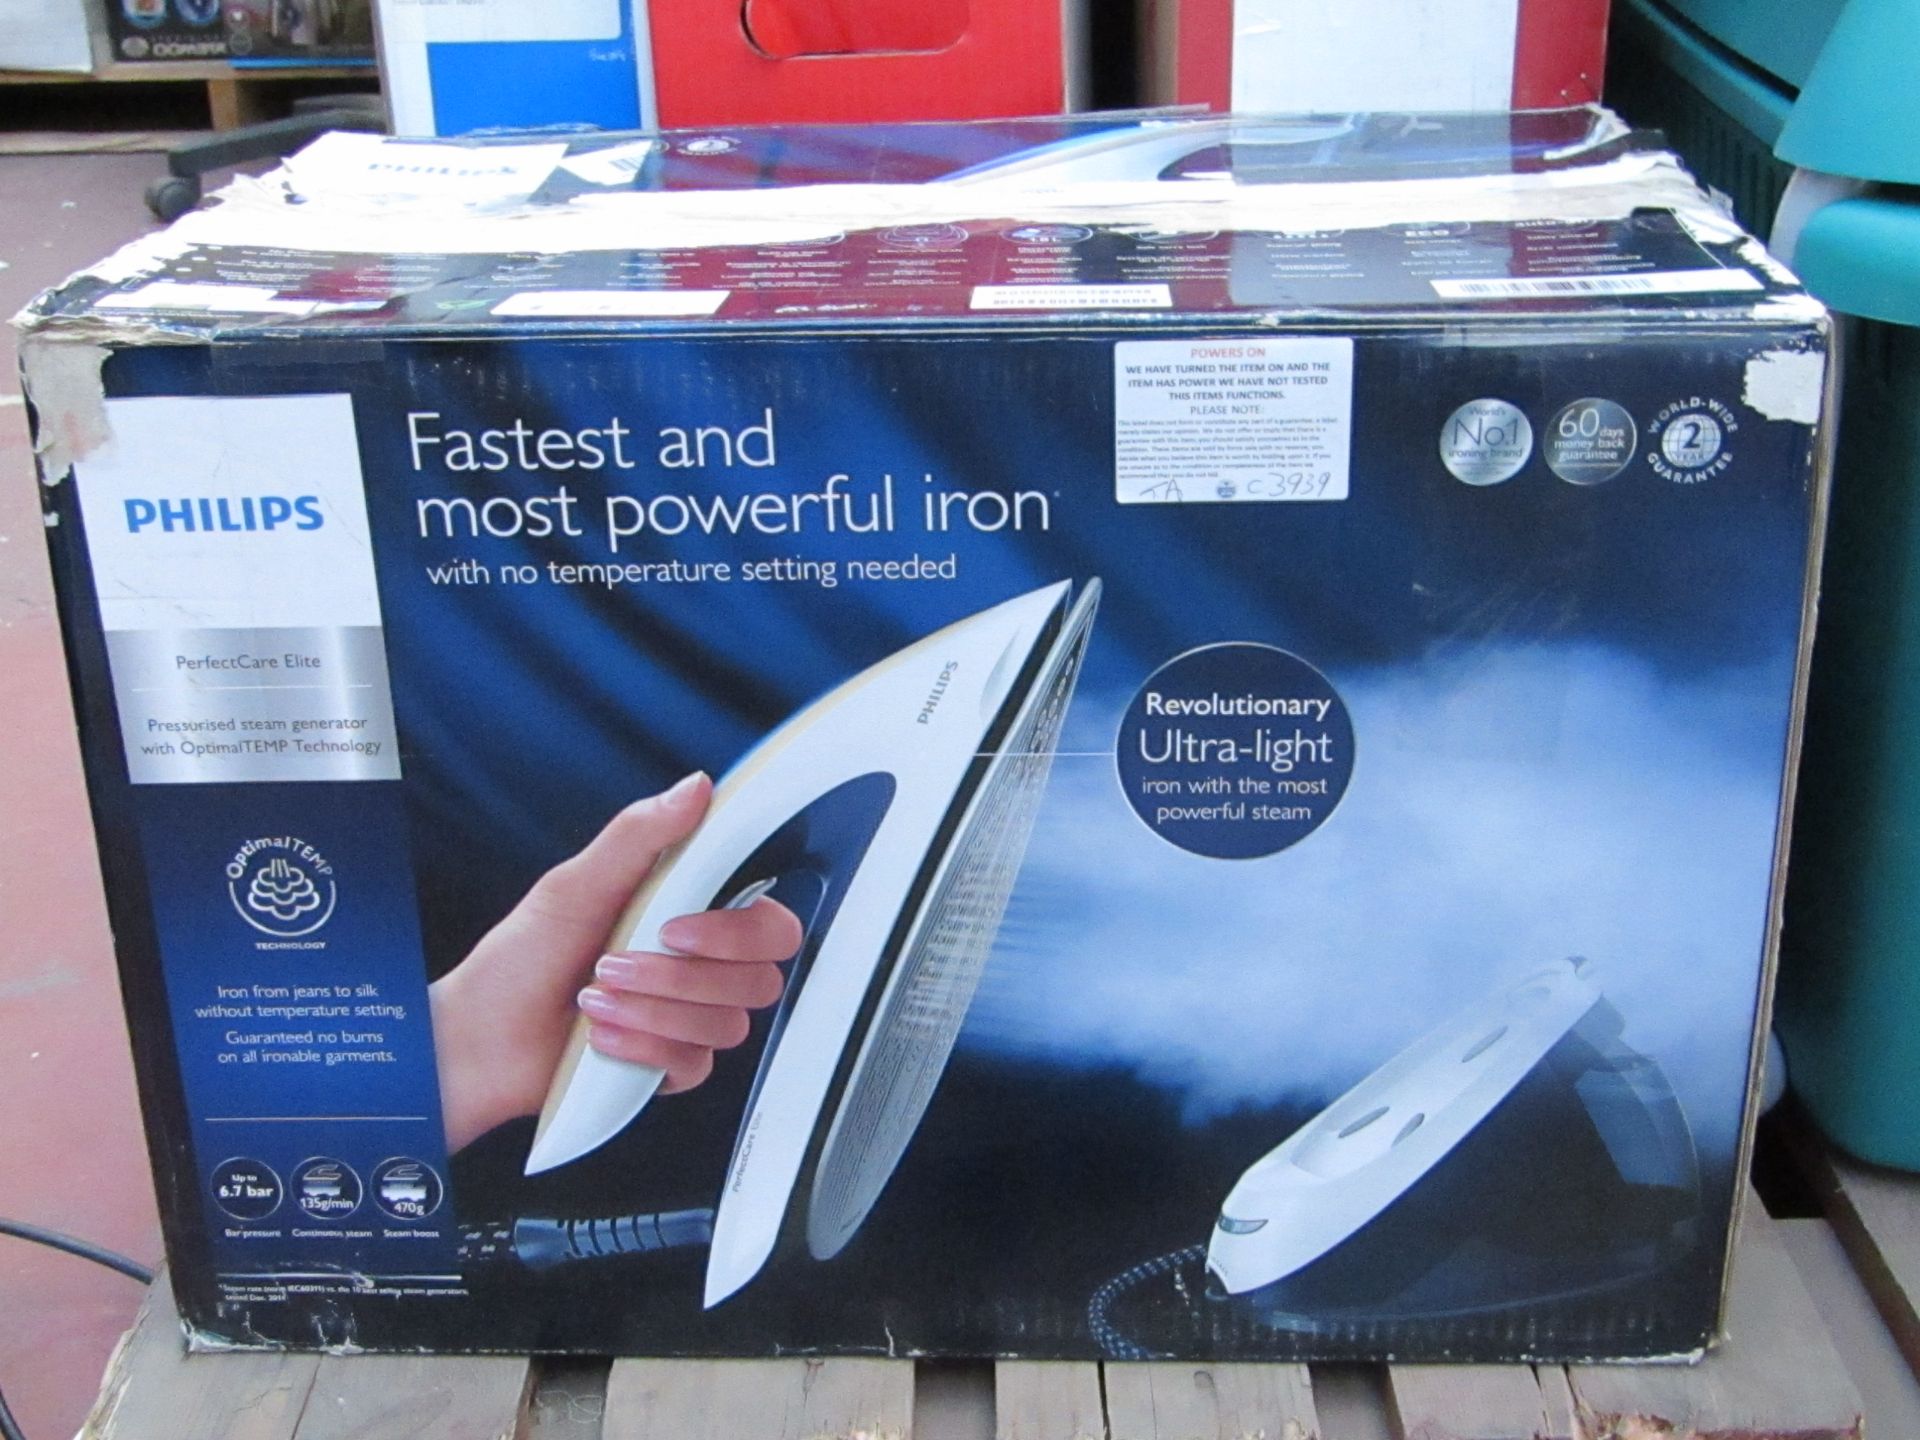 Philips ultra-light iron. Powers on. Boxed.